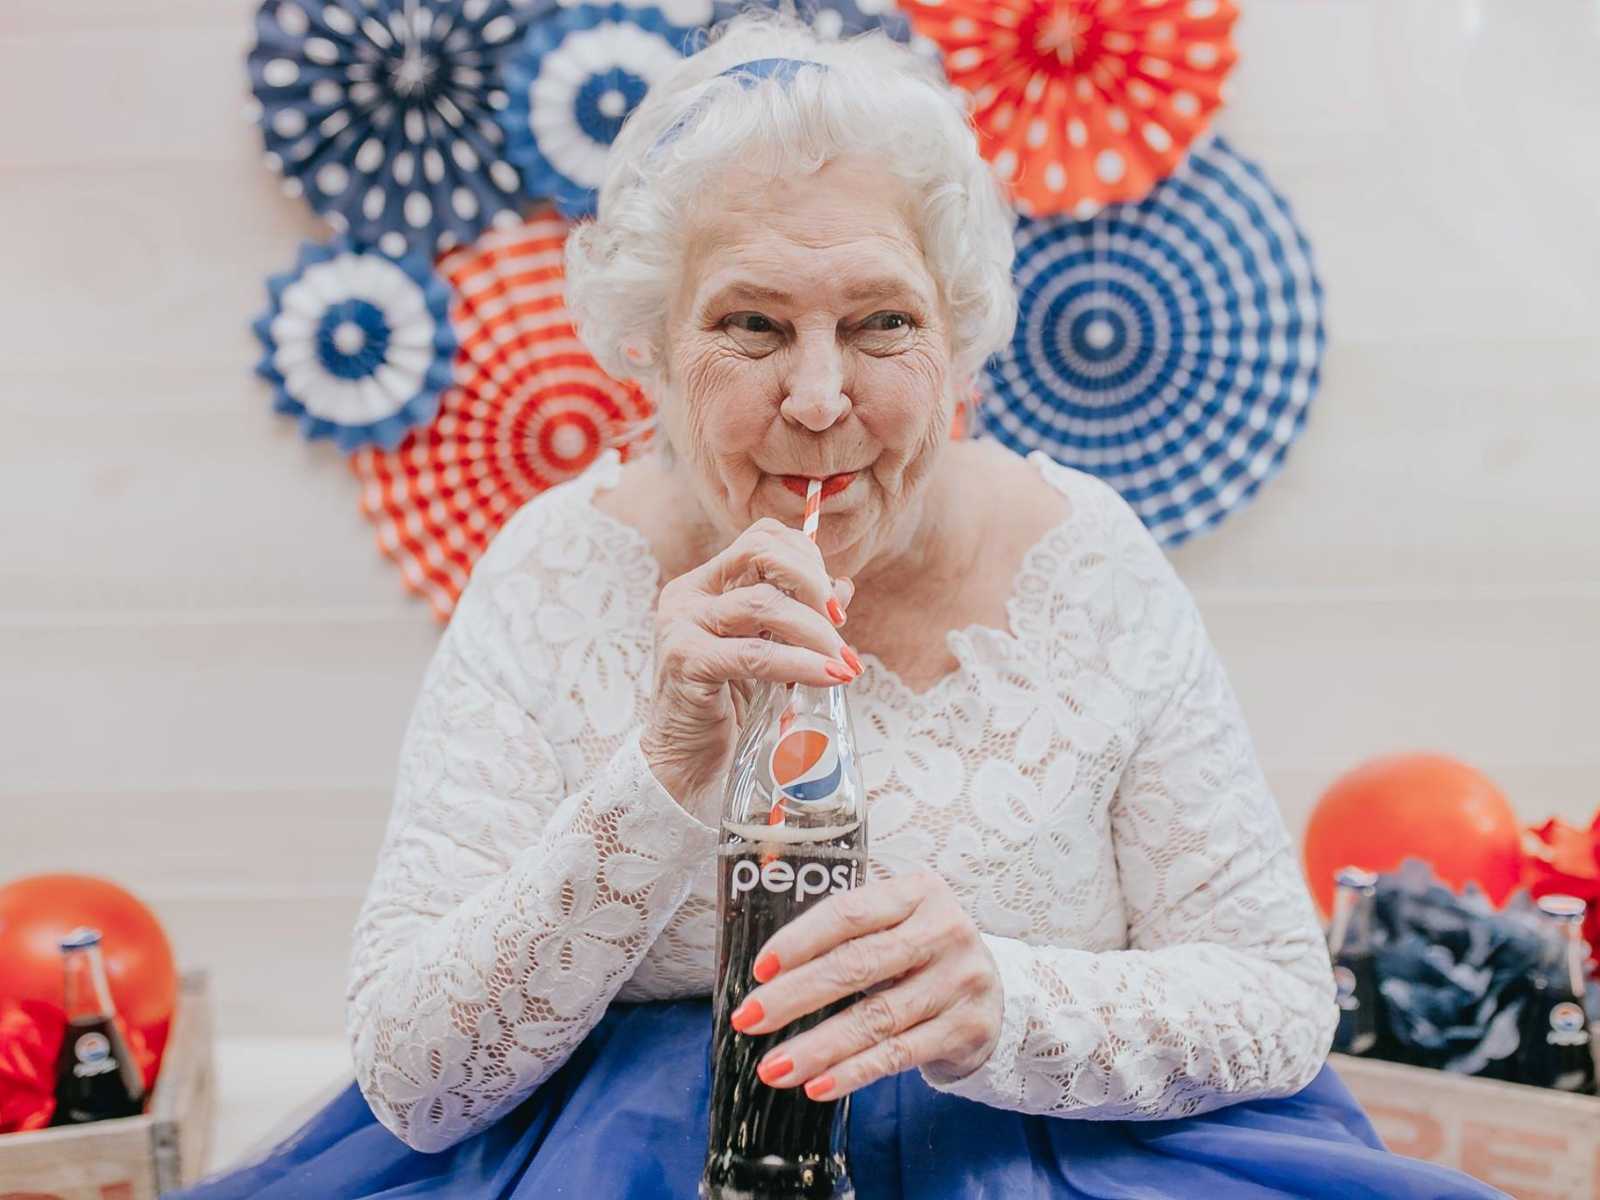 close up of elderly woman sipping pepsi out of a red and white striped straw